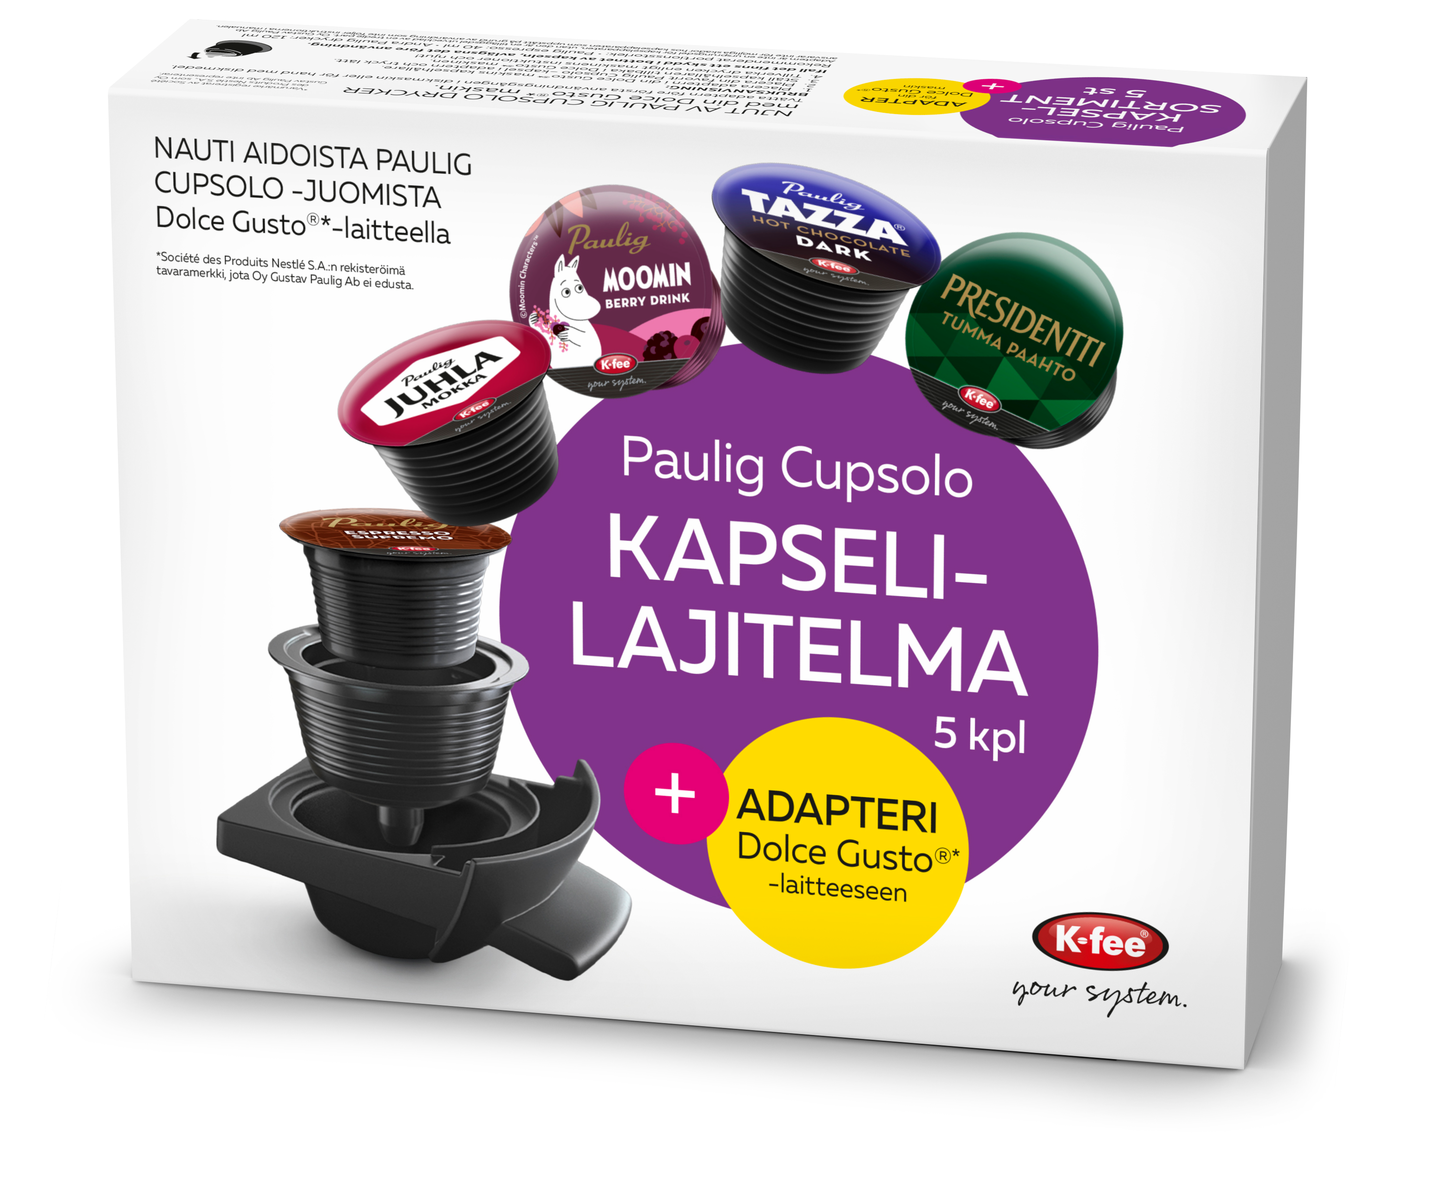 Какие капсулы dolce gusto. Адаптер для капсул Dolce gusto. Адаптер для кофейных капсул. Dolce gusto капсулы. Капсулы для кофемашины Dolce gusto.